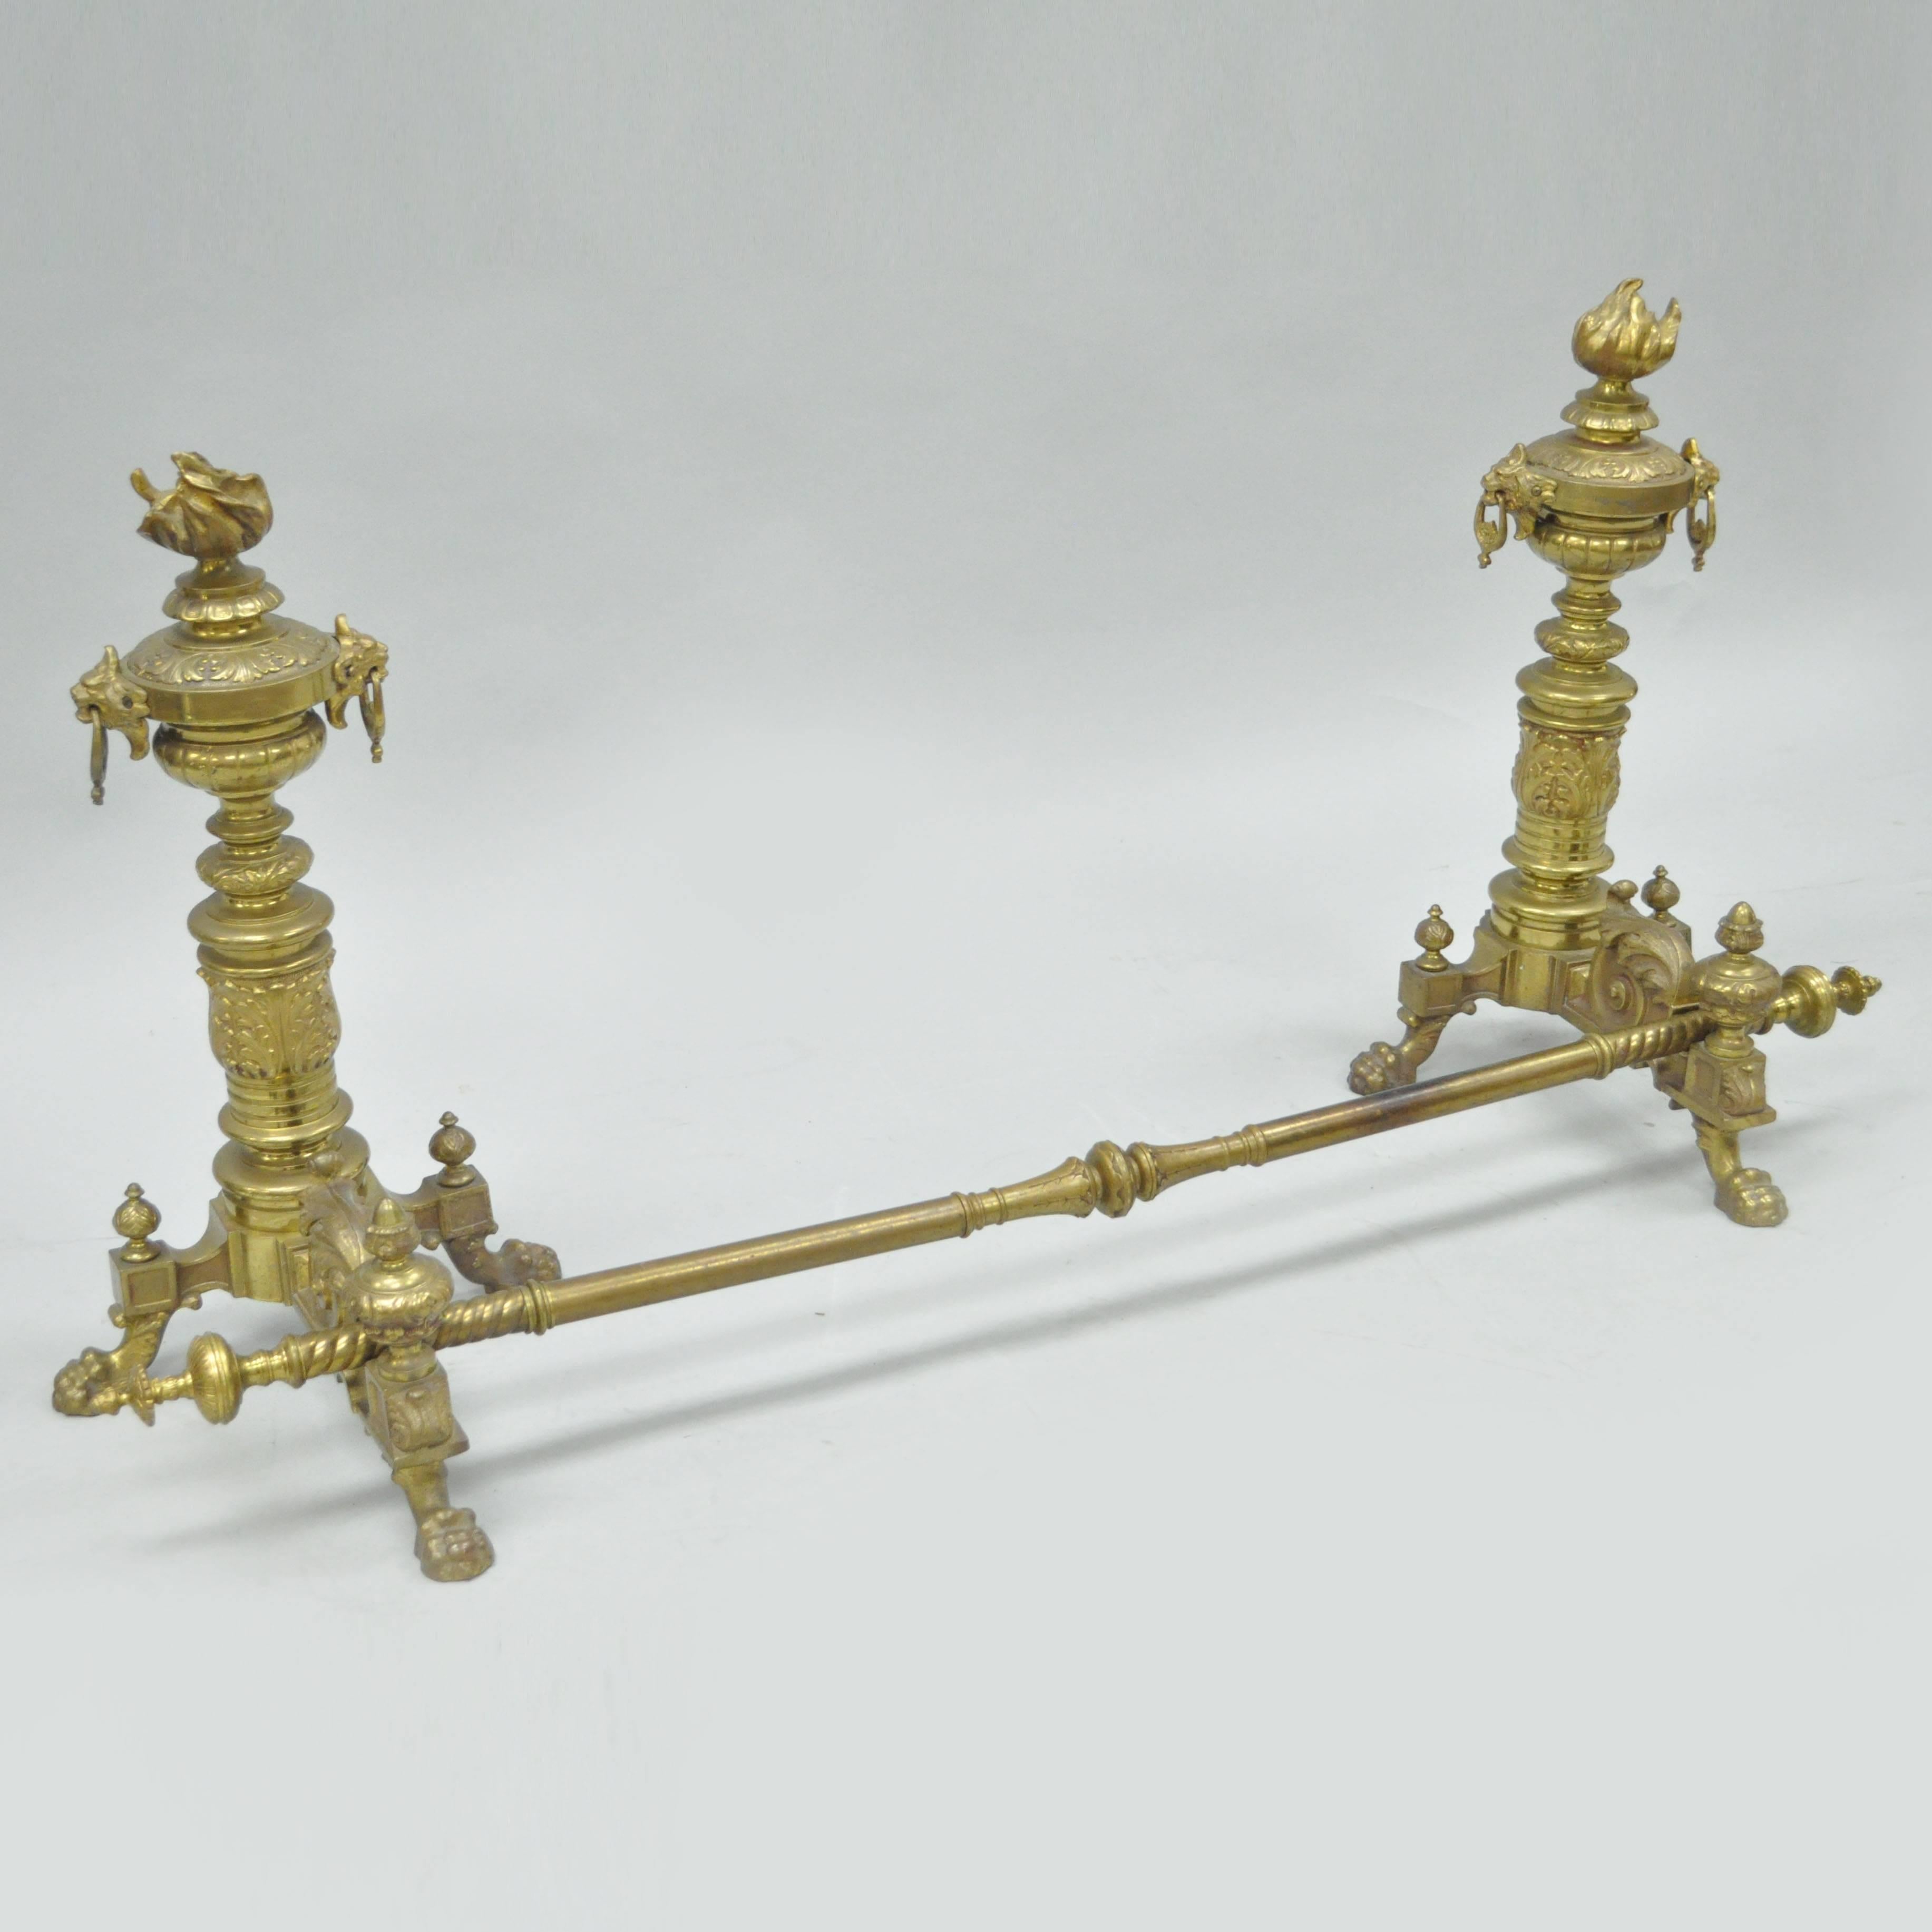 Pair of 19th C. French Empire Neoclassical Flame & Lion Brass Paw Andirons & Bar For Sale 5